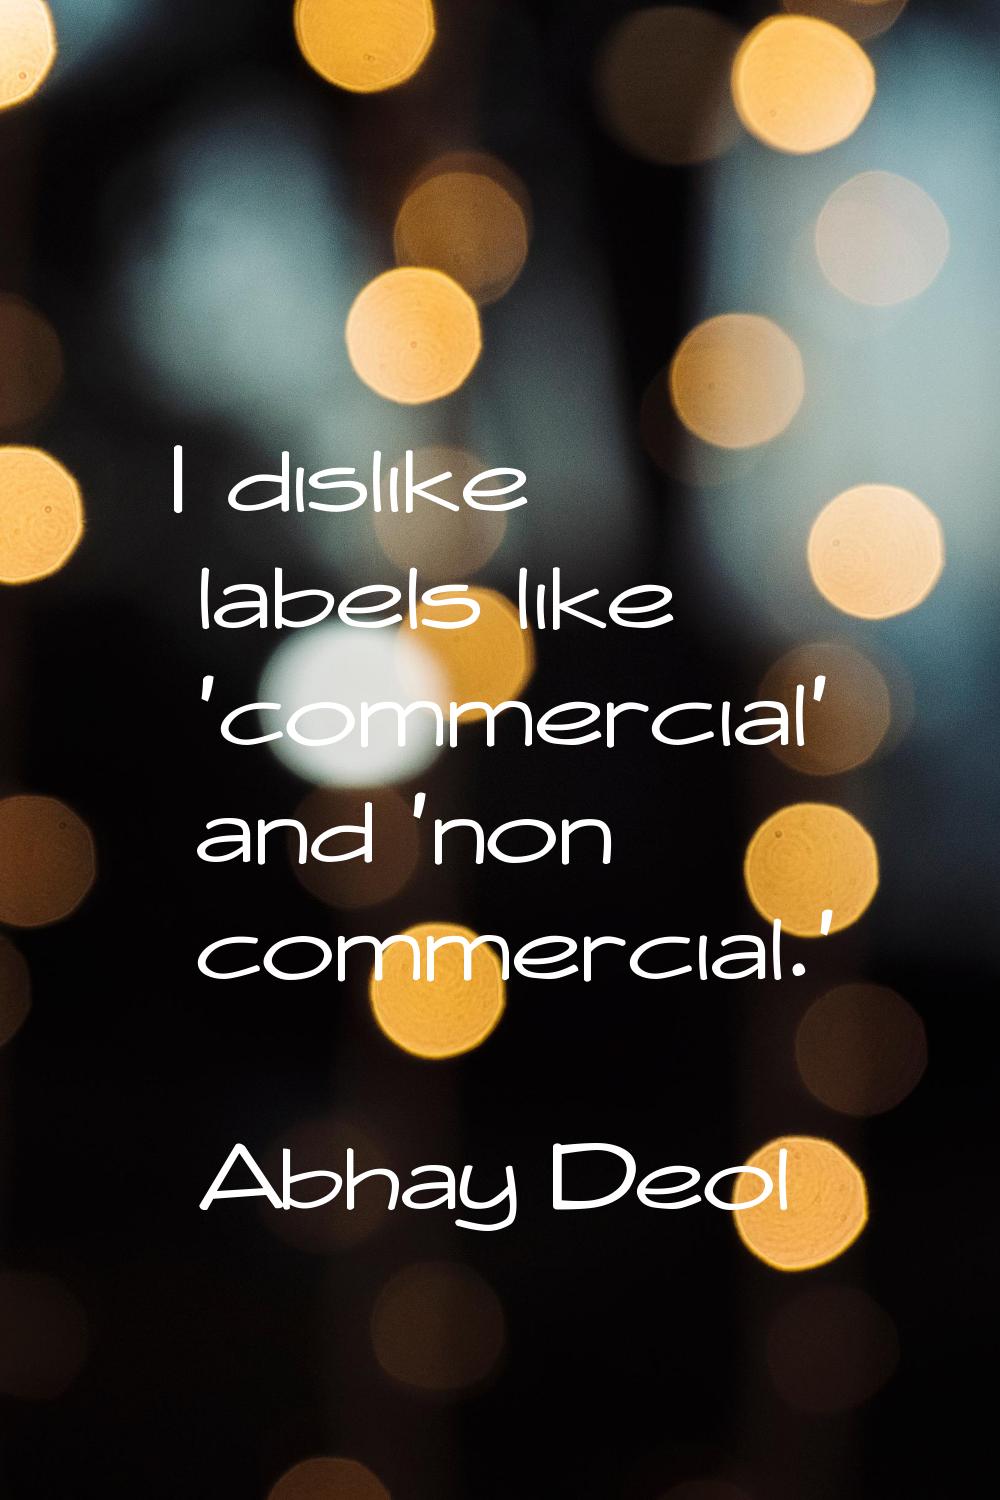 I dislike labels like 'commercial' and 'non commercial.'